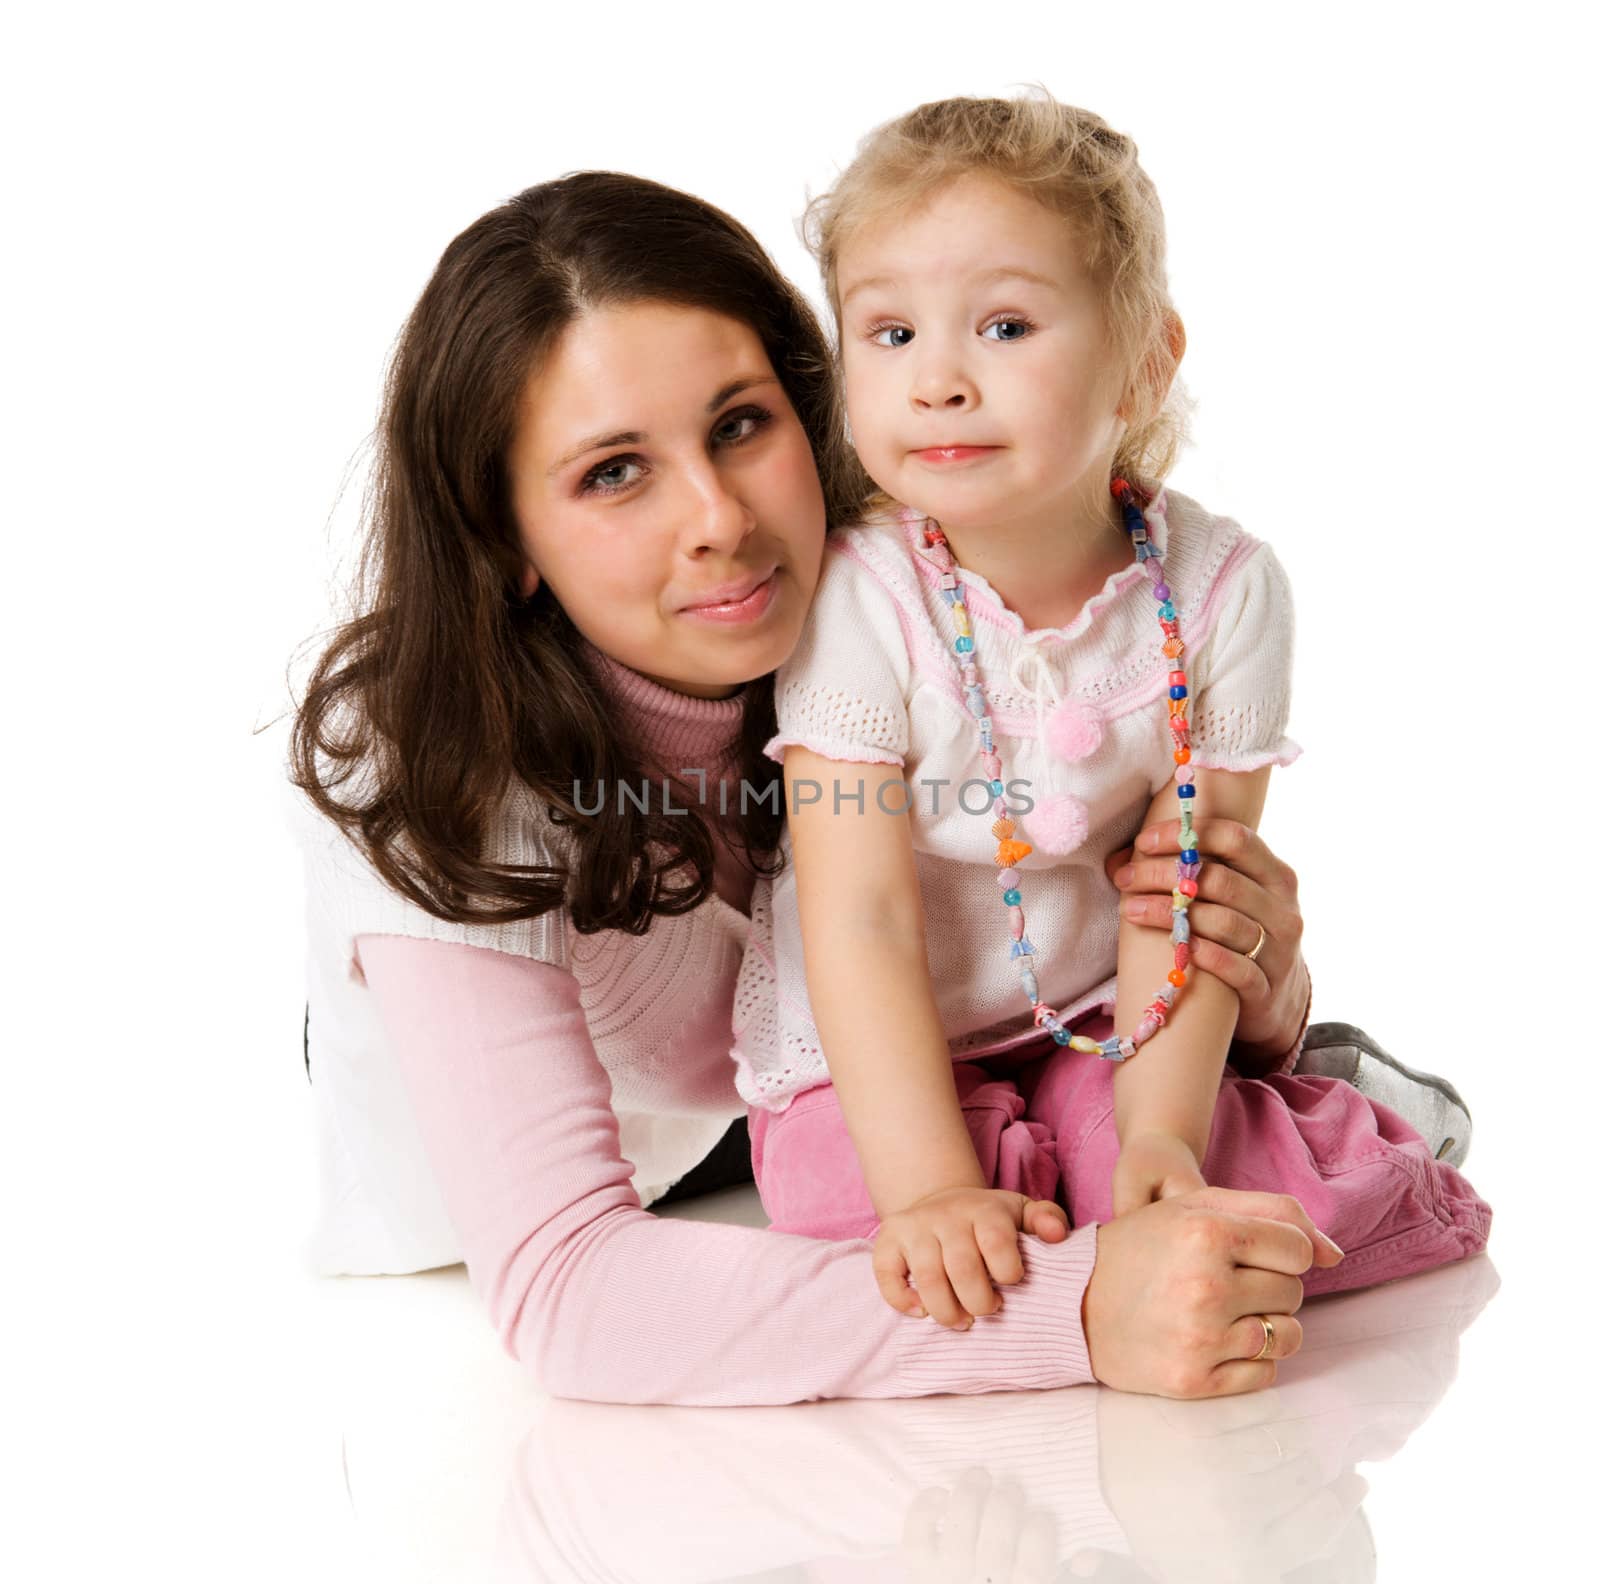 mother and daughter posing together  isolated on white